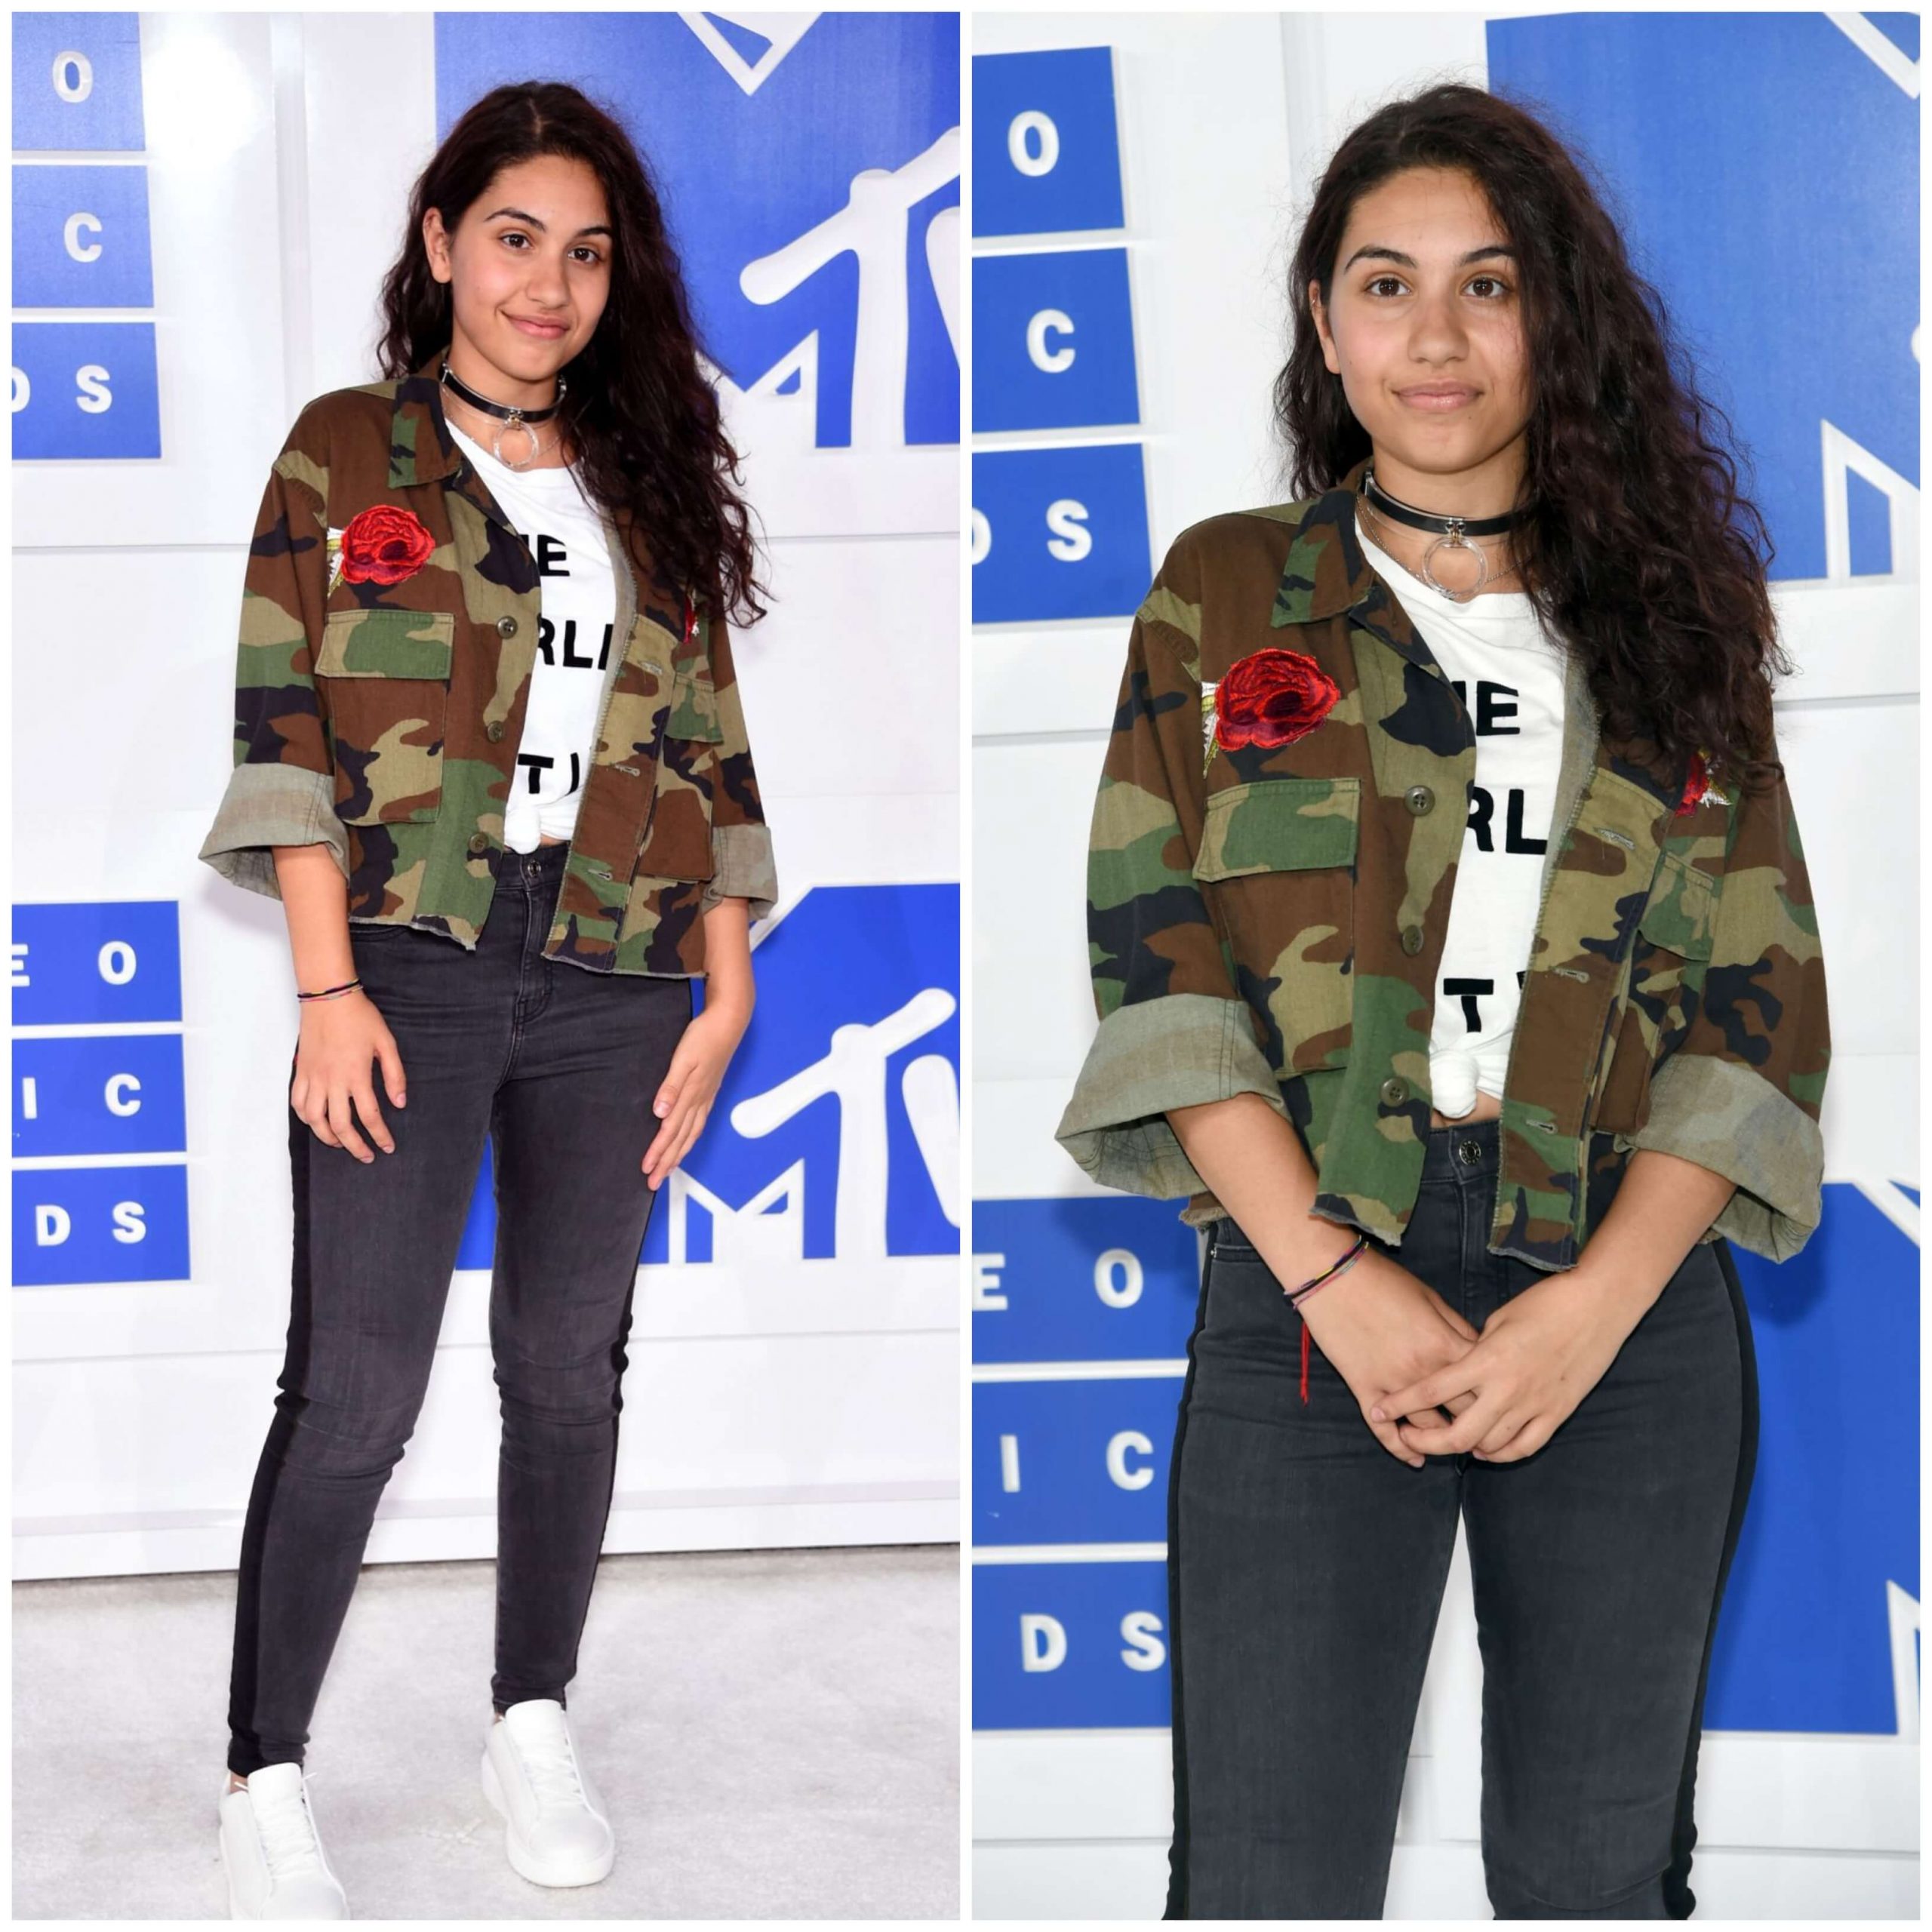 Alessia Cara –In White Top With Black Jeans MTV Video Music Awards 2016 in New York City